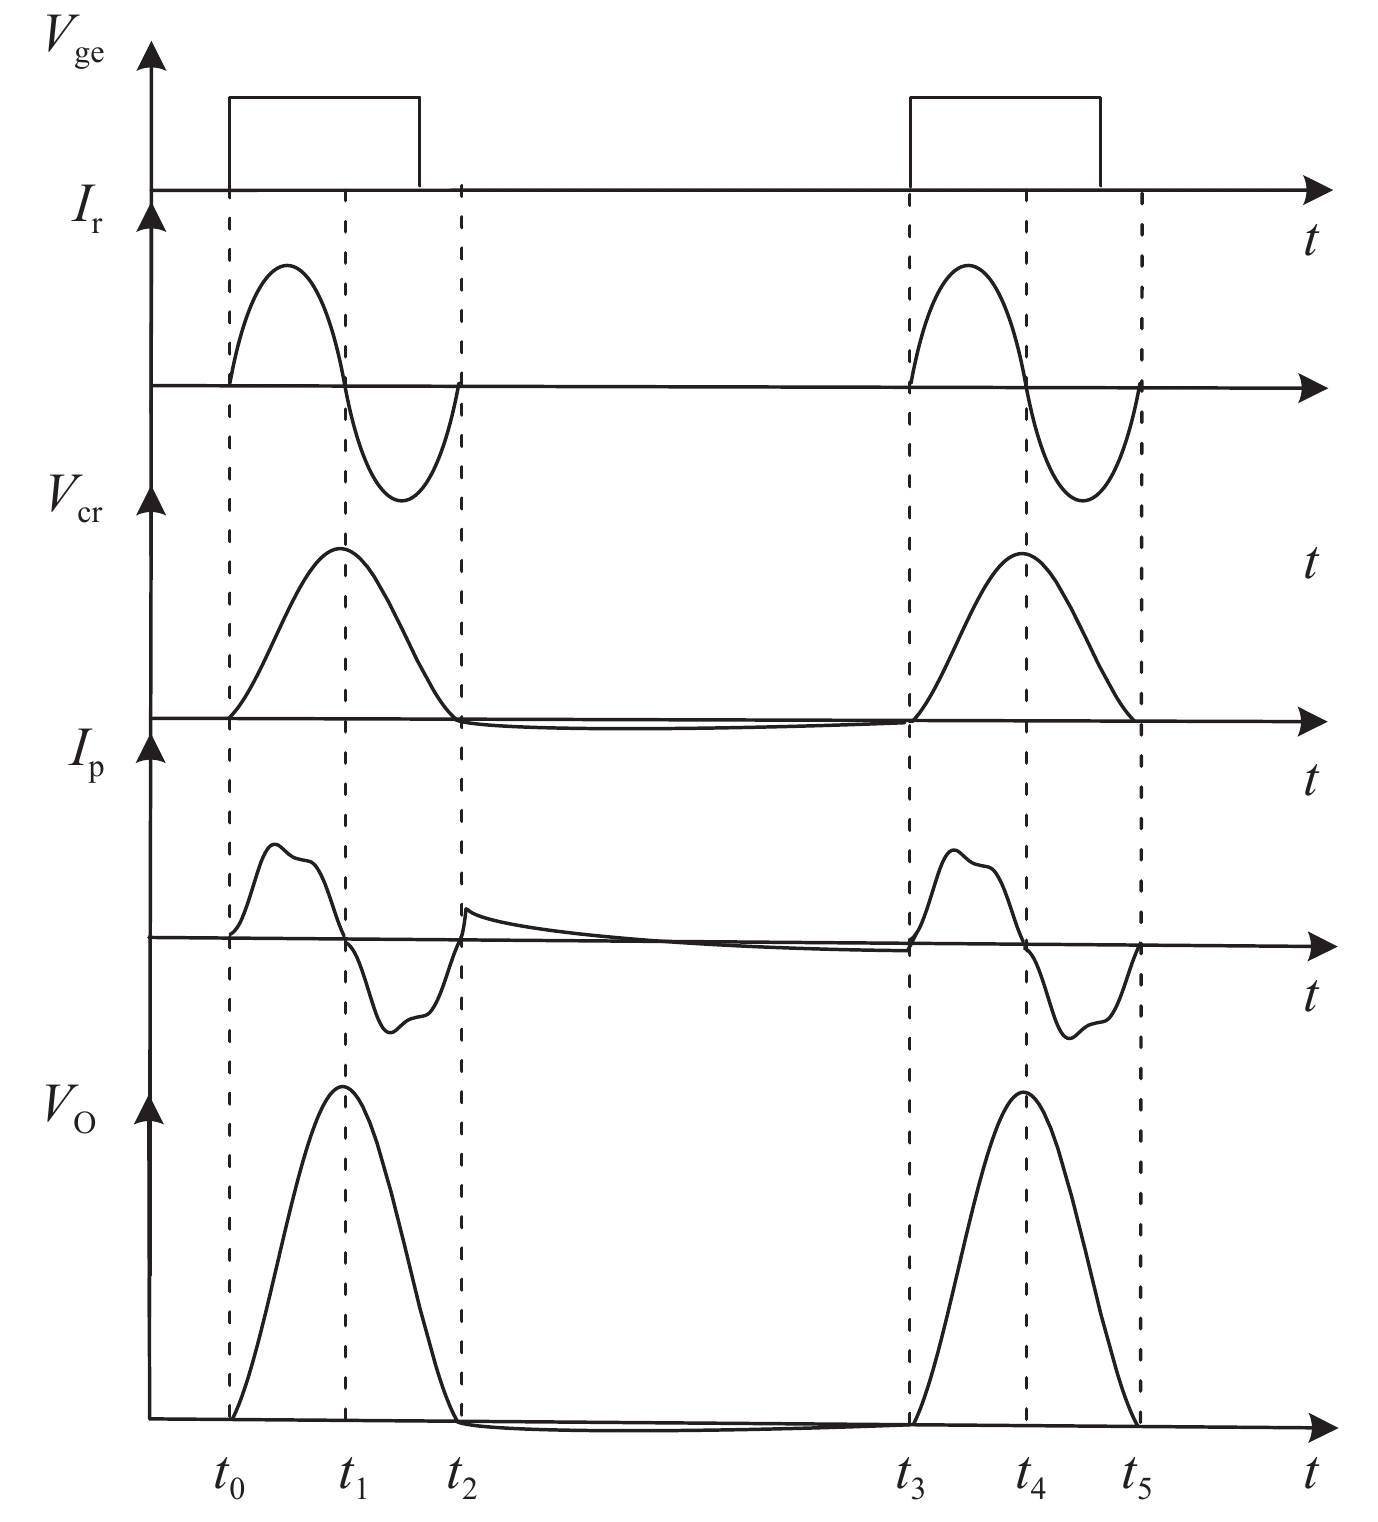 Theoretical waveforms of Vge, Ir, Vcr, Ip, Vo